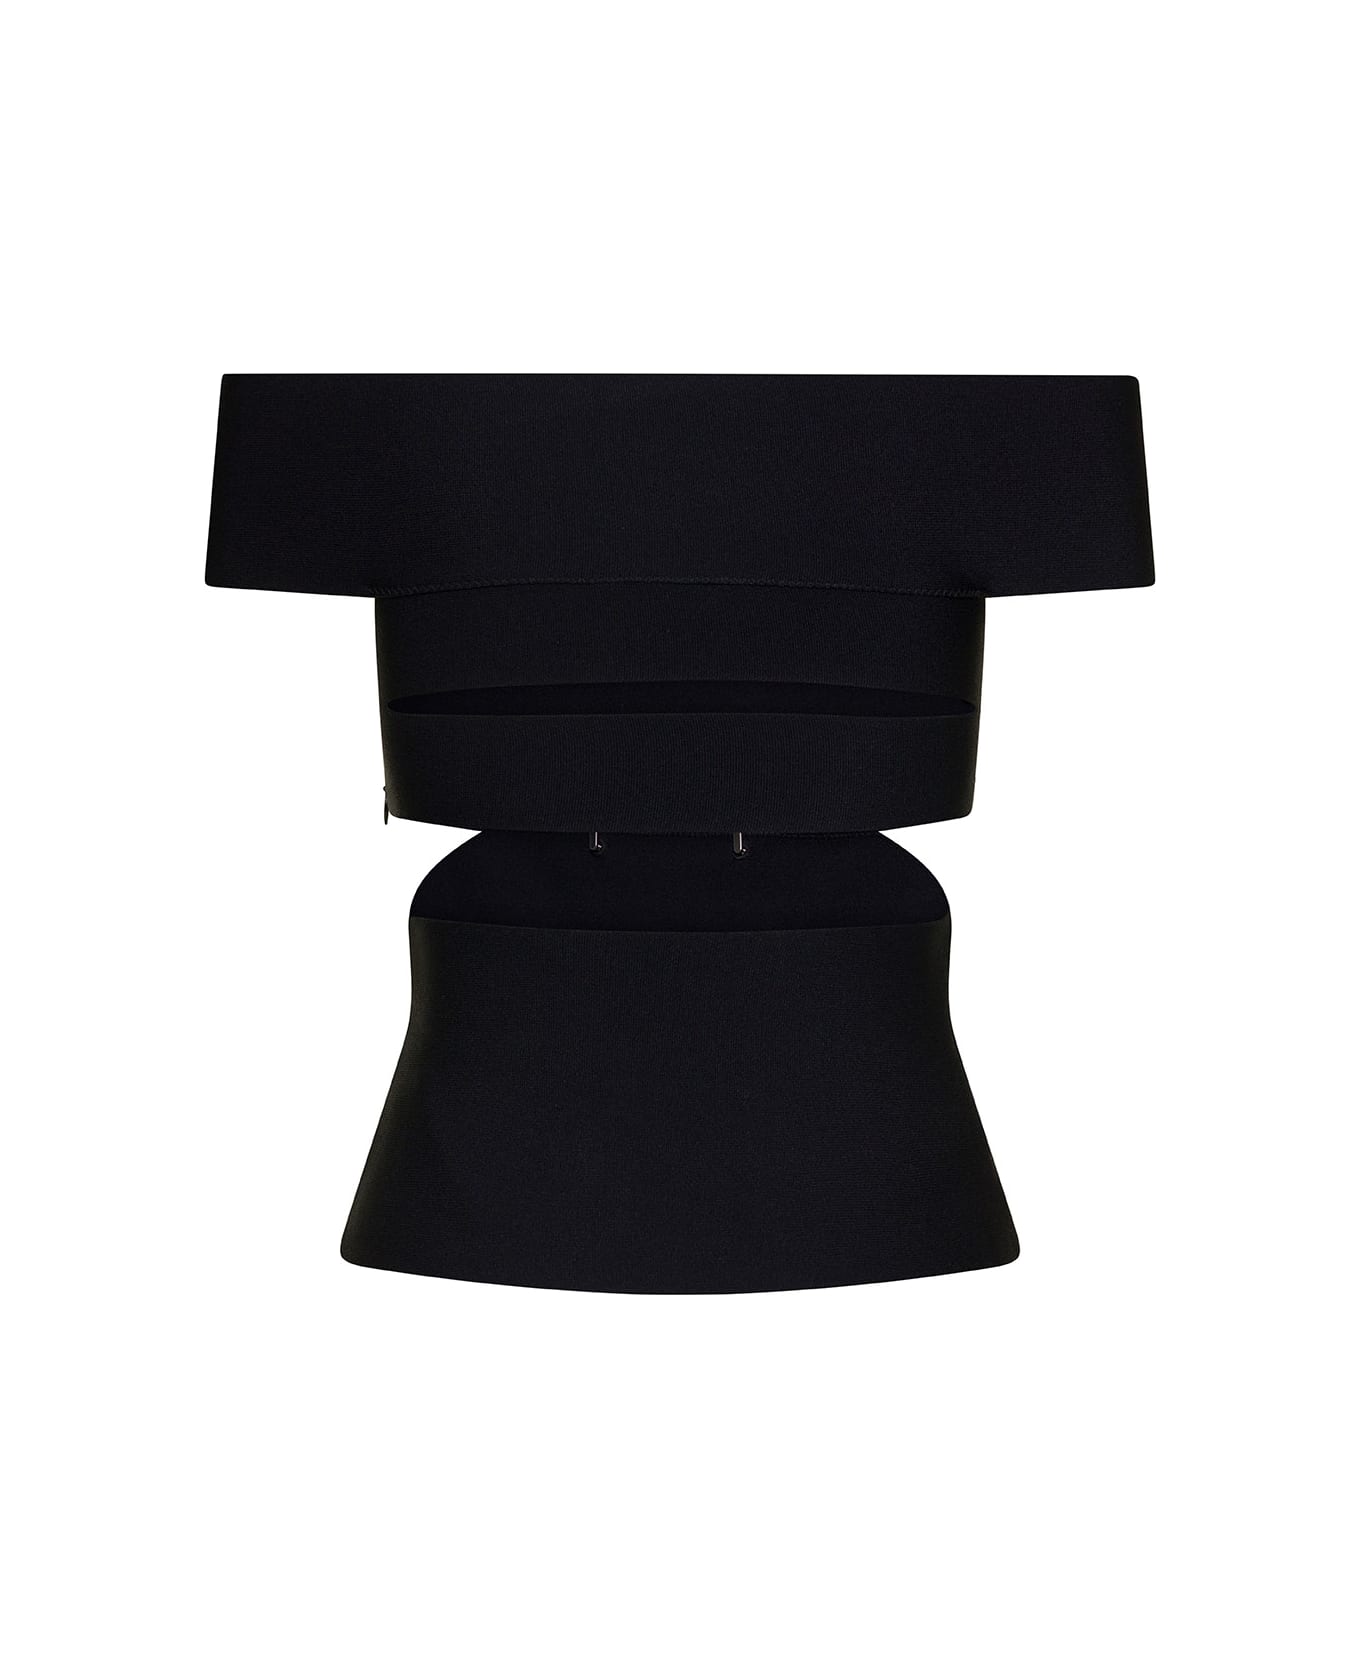 Alexander McQueen Black Off-the-shoulders Top With Cut-out And Metal Rings In Viscose Blend Woman - Black